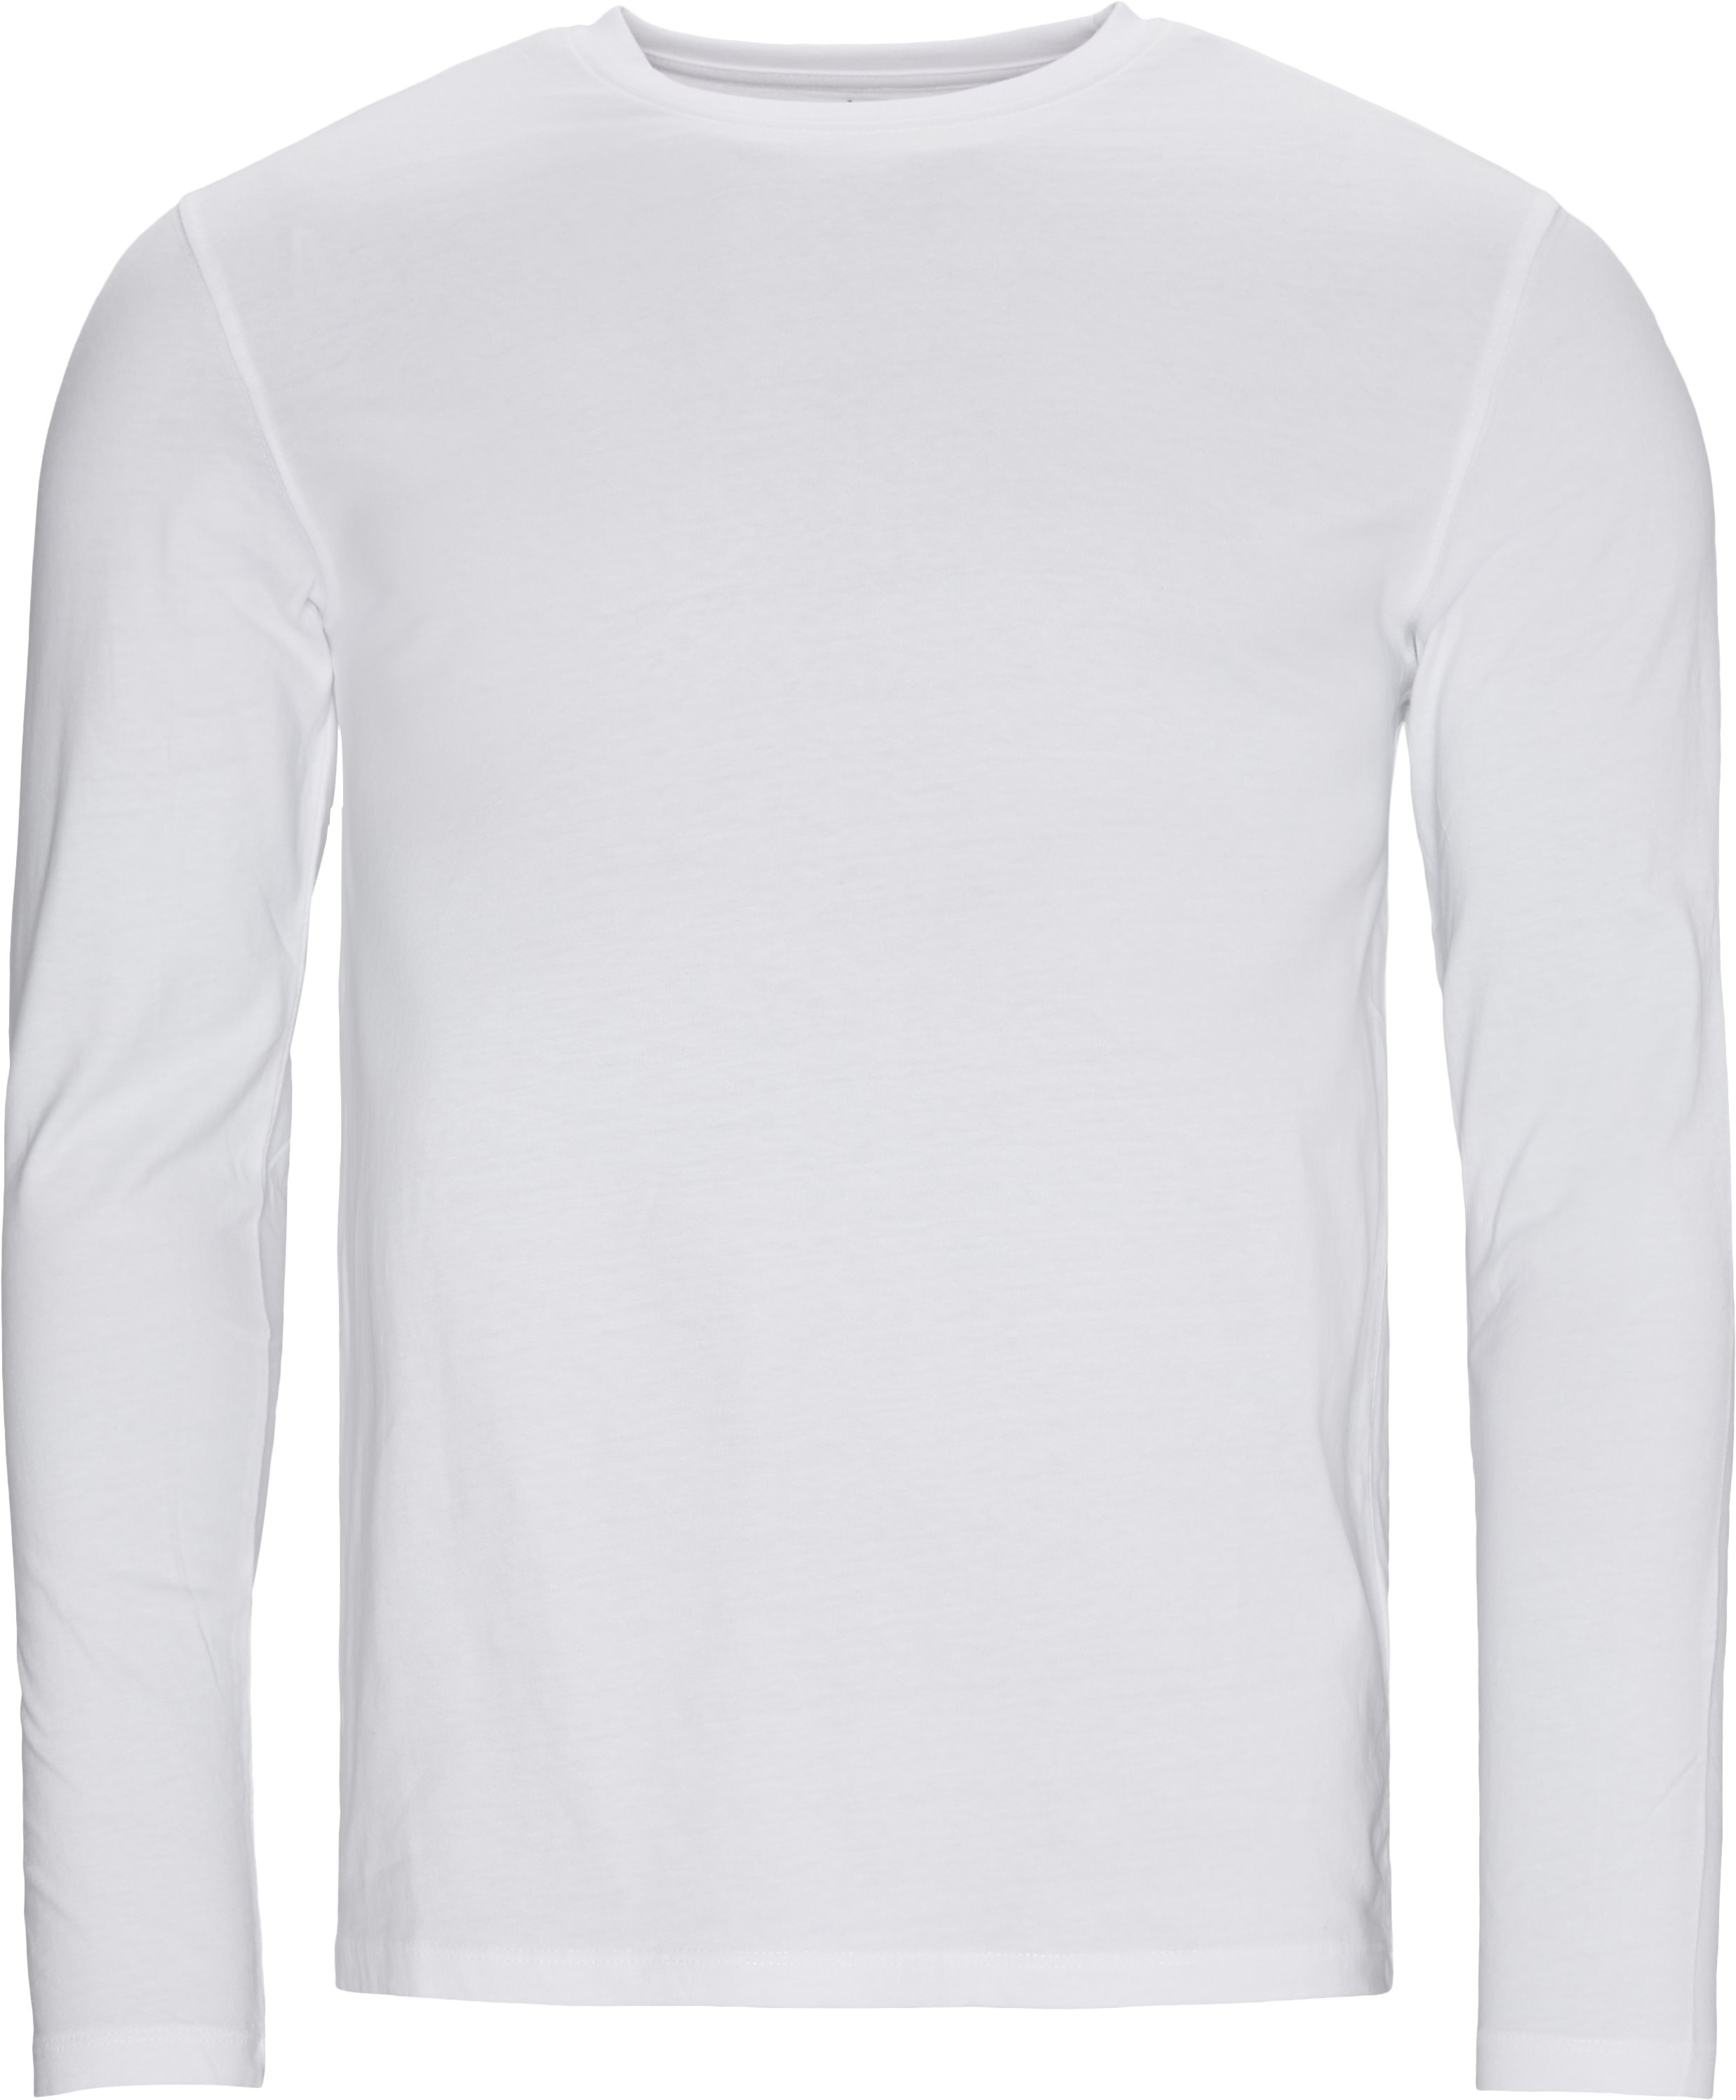 Ray Long Sleeve Tee - T-shirts - Regular fit - White